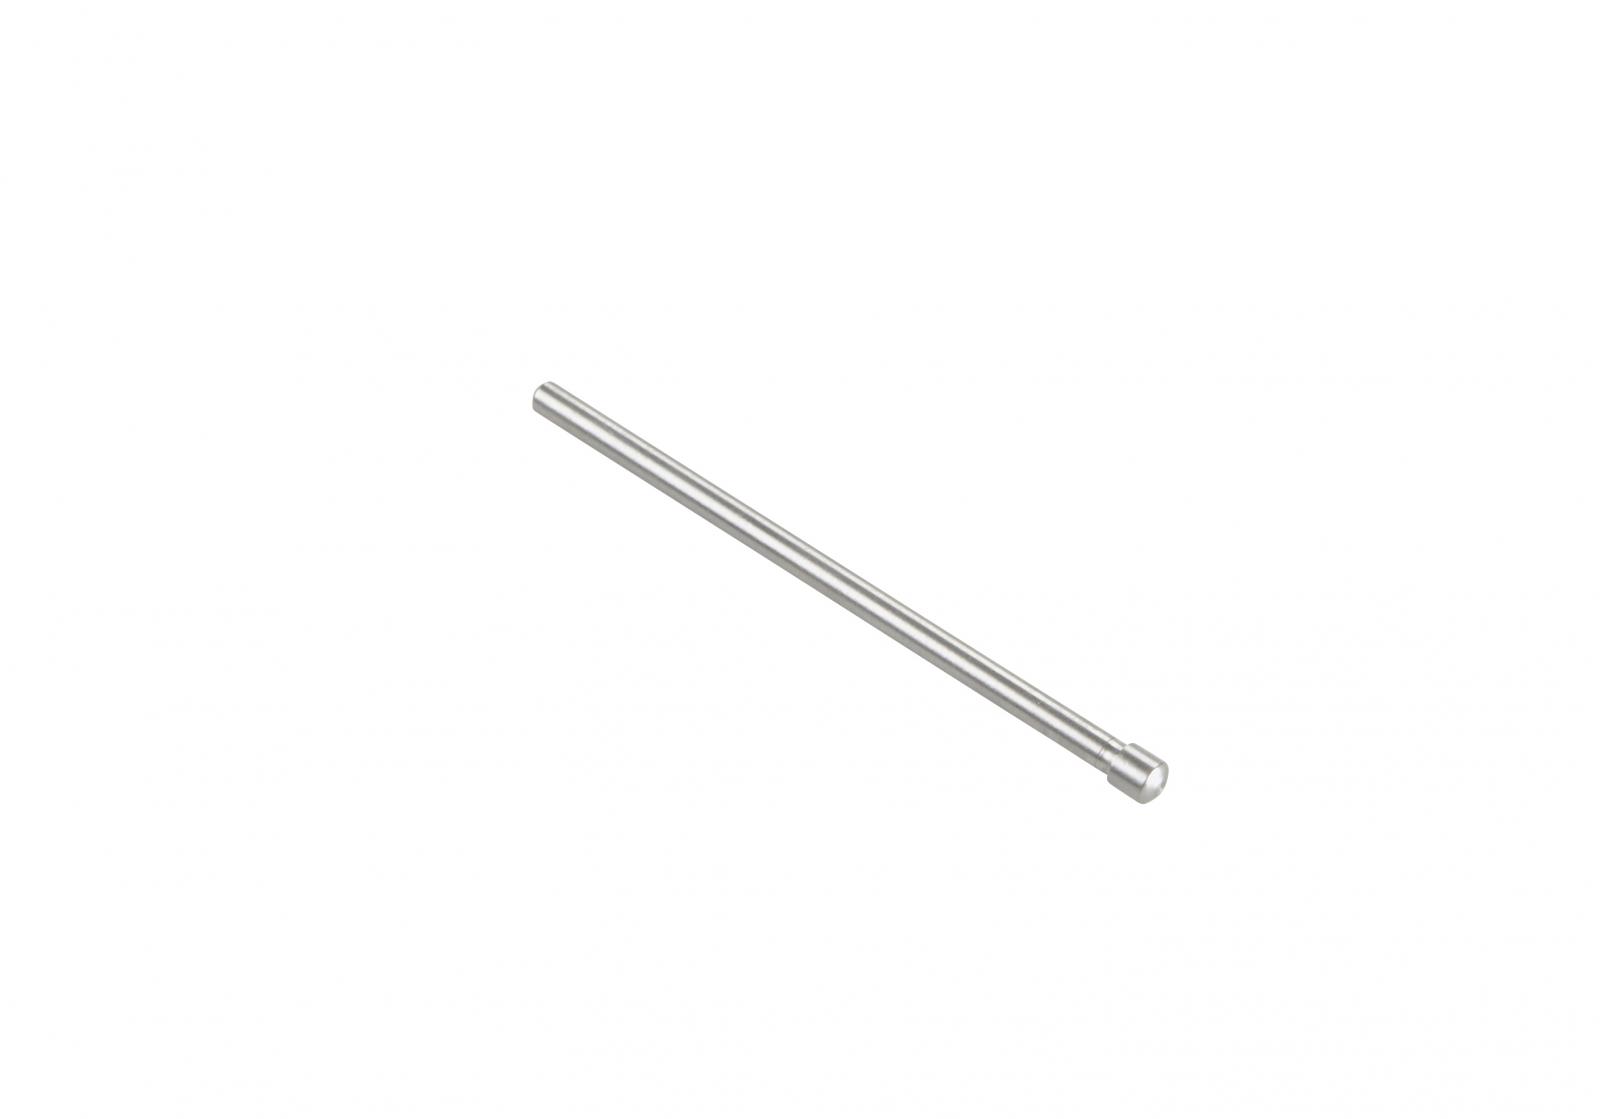 TapeTech® Disengaging Rod. Part number 050034